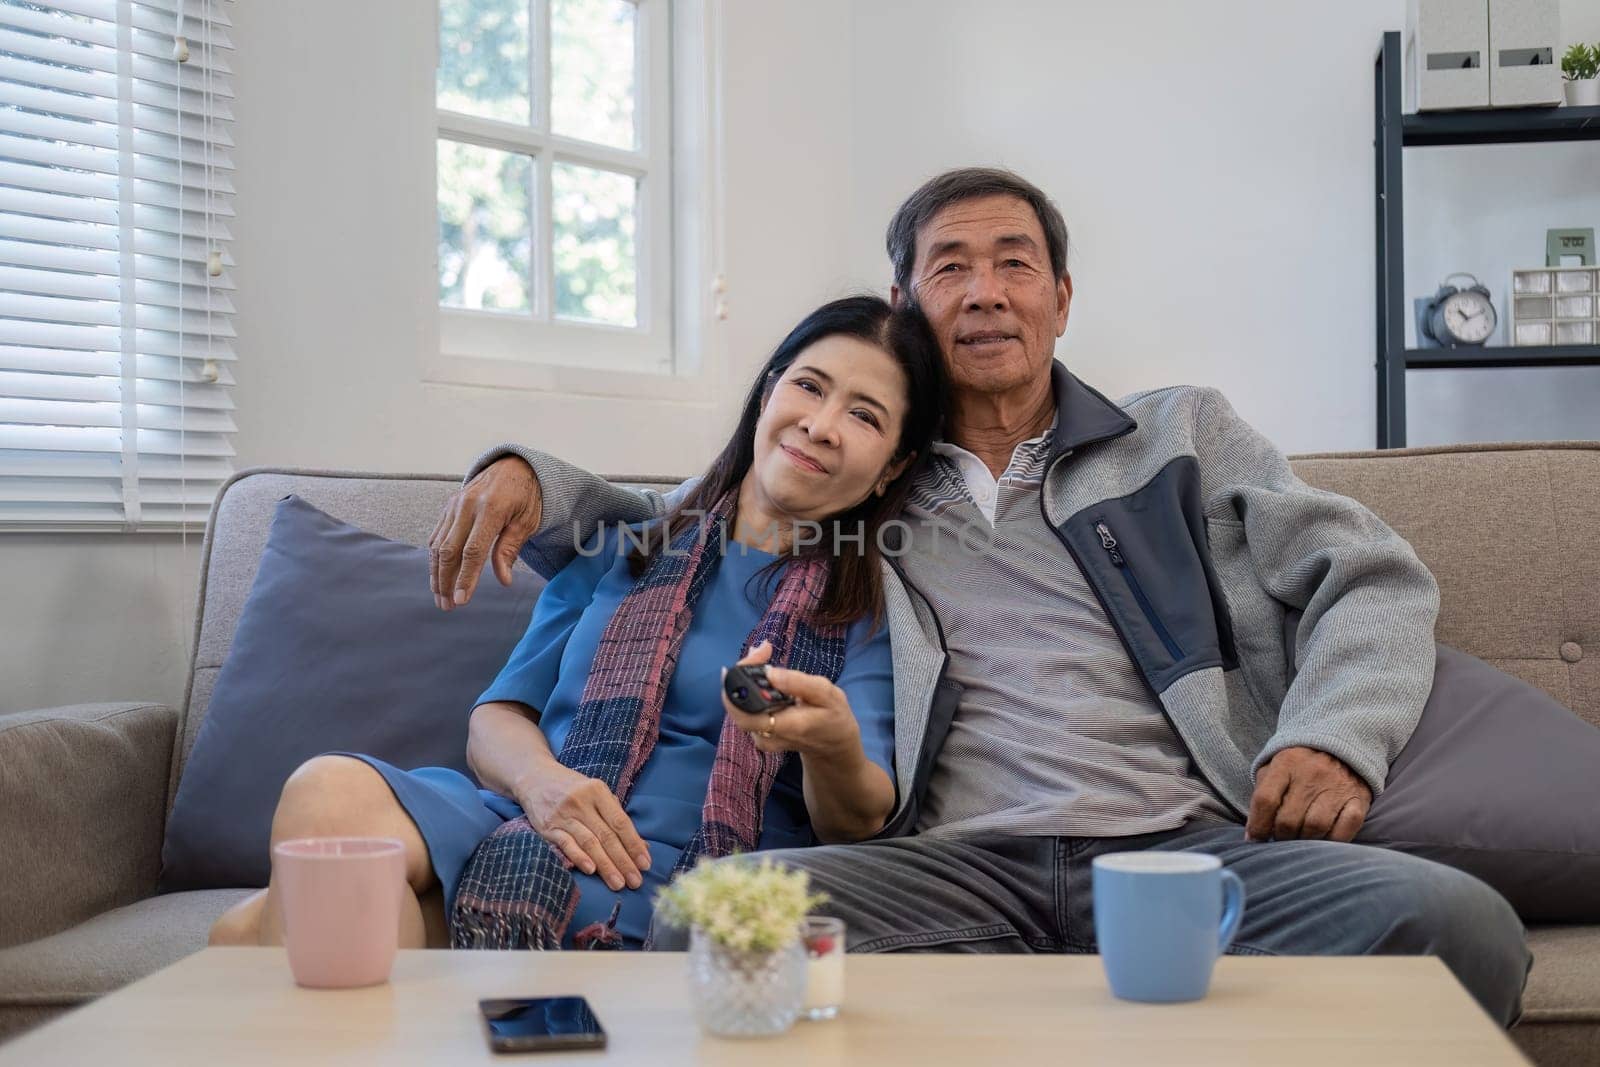 Retired Asian couple in their 60s Spend your free time happily watching TV shows together in the living room..